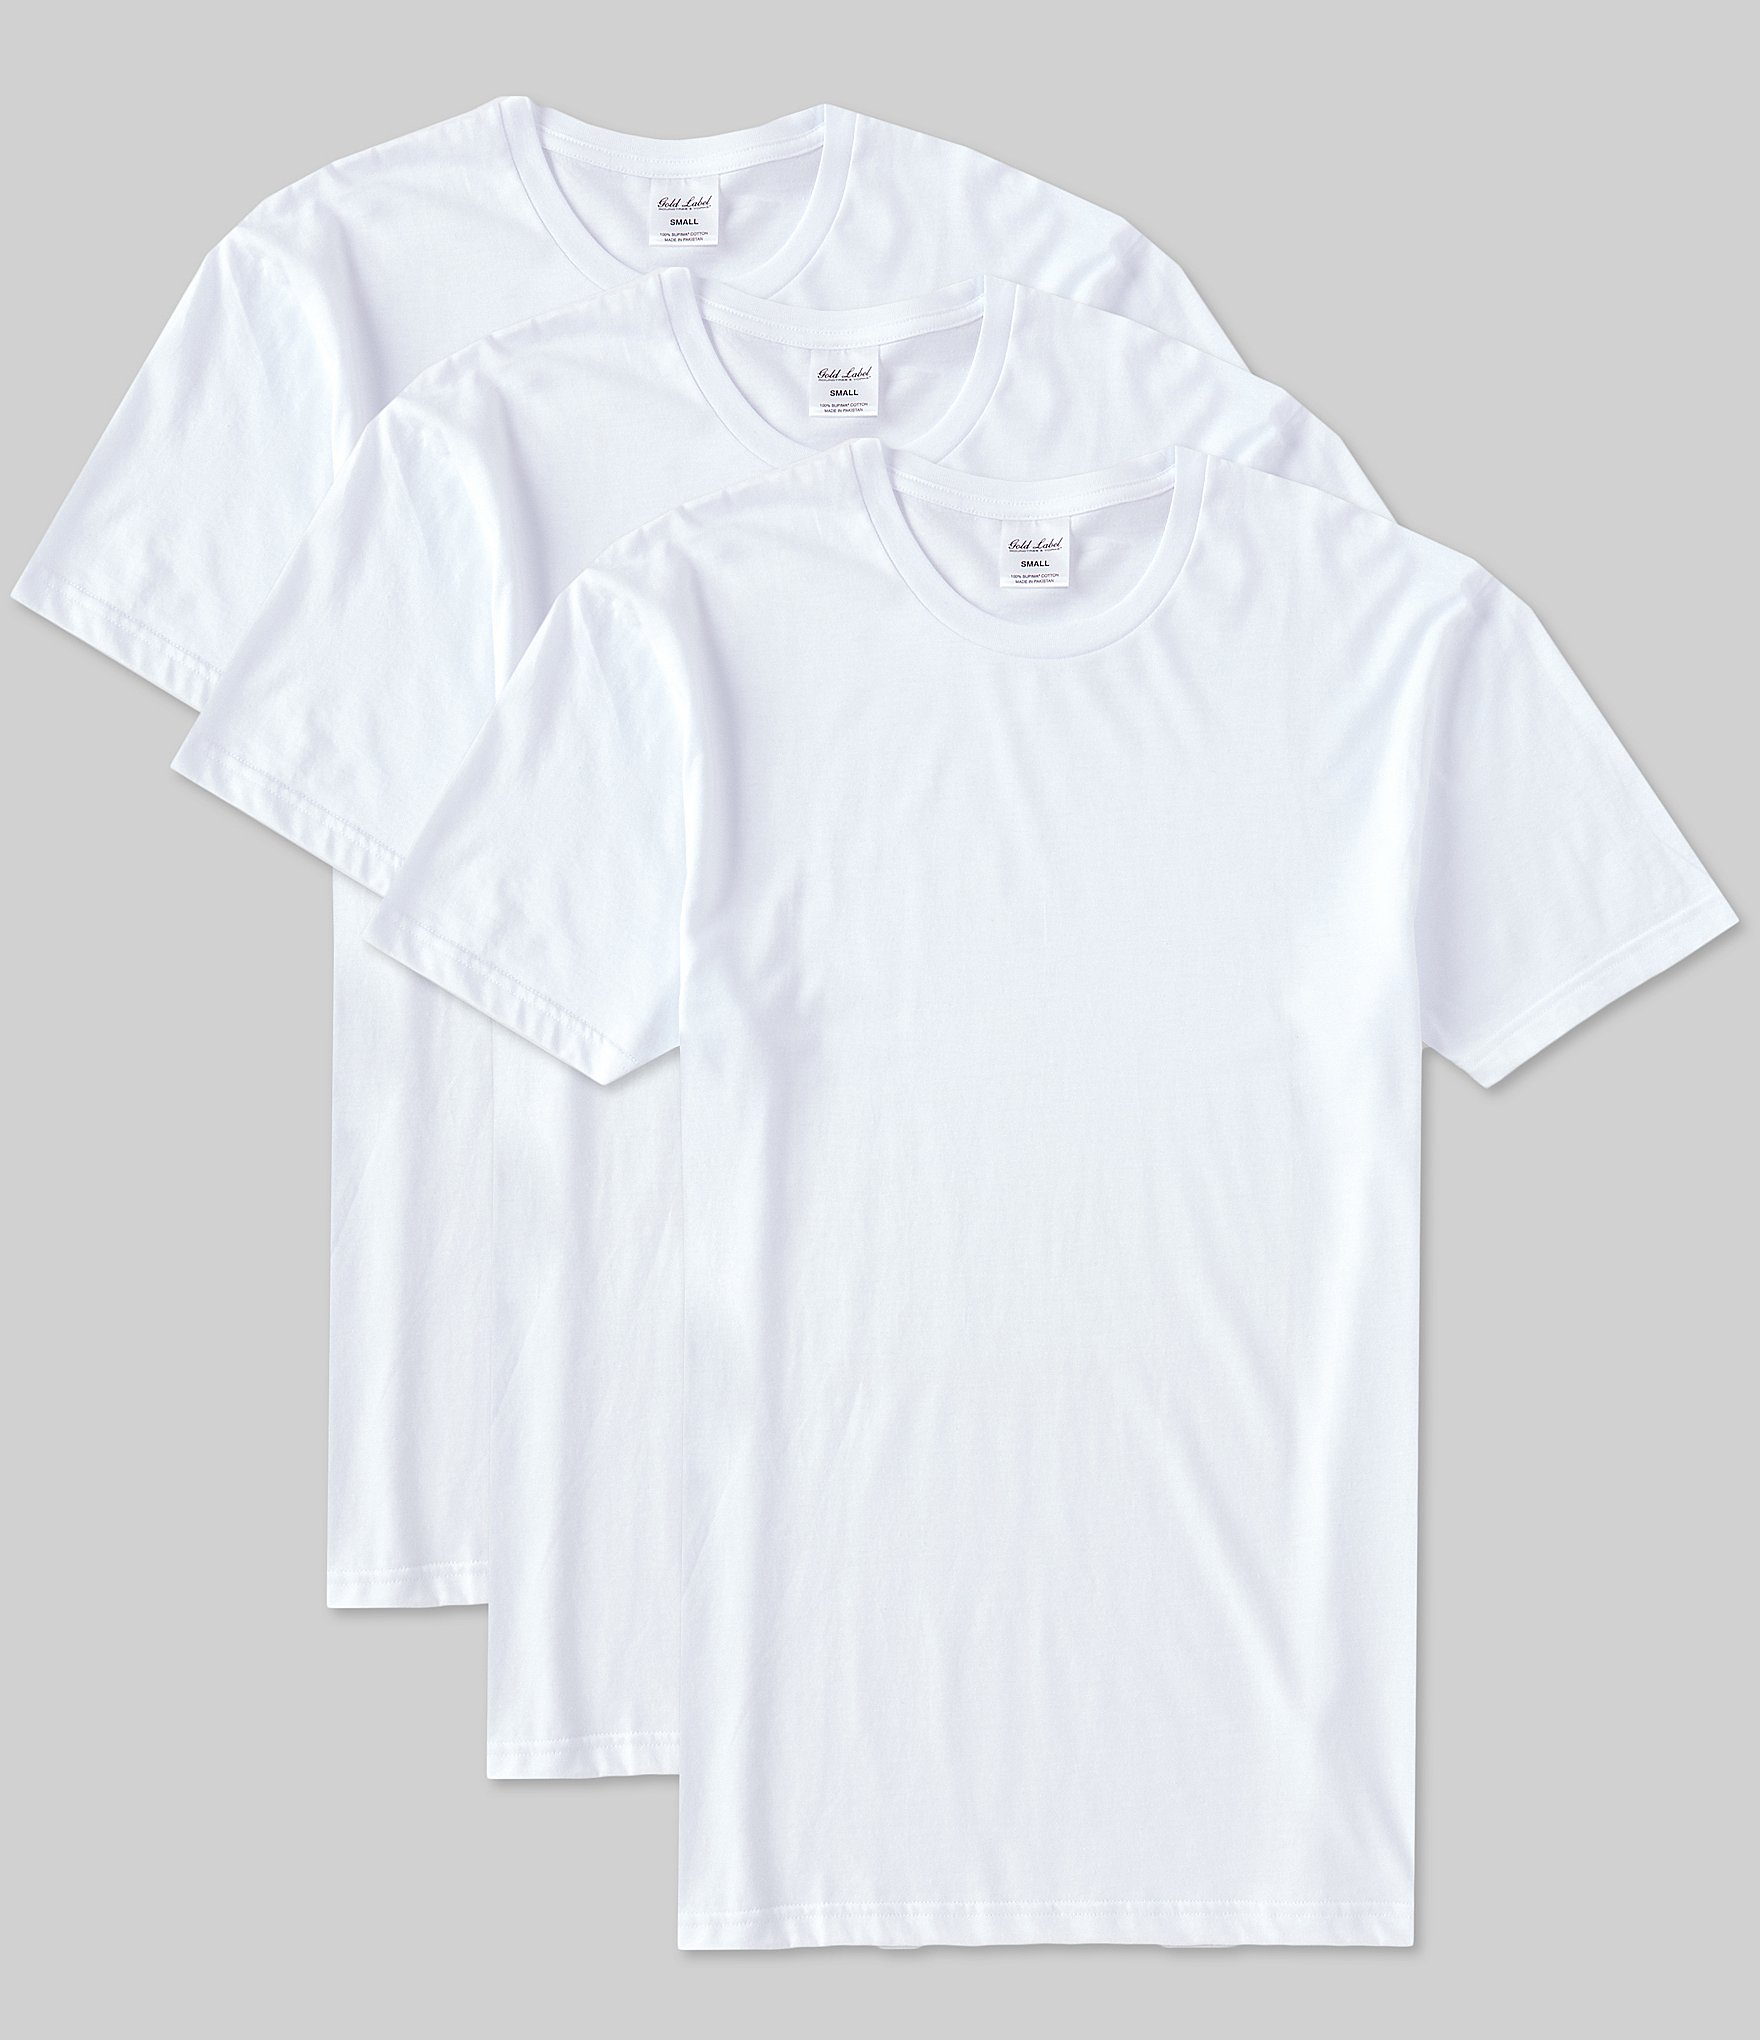 Gold Label Roundtree & Yorke Supima Cotton Crew Neck T-Shirts 3-Pack ...